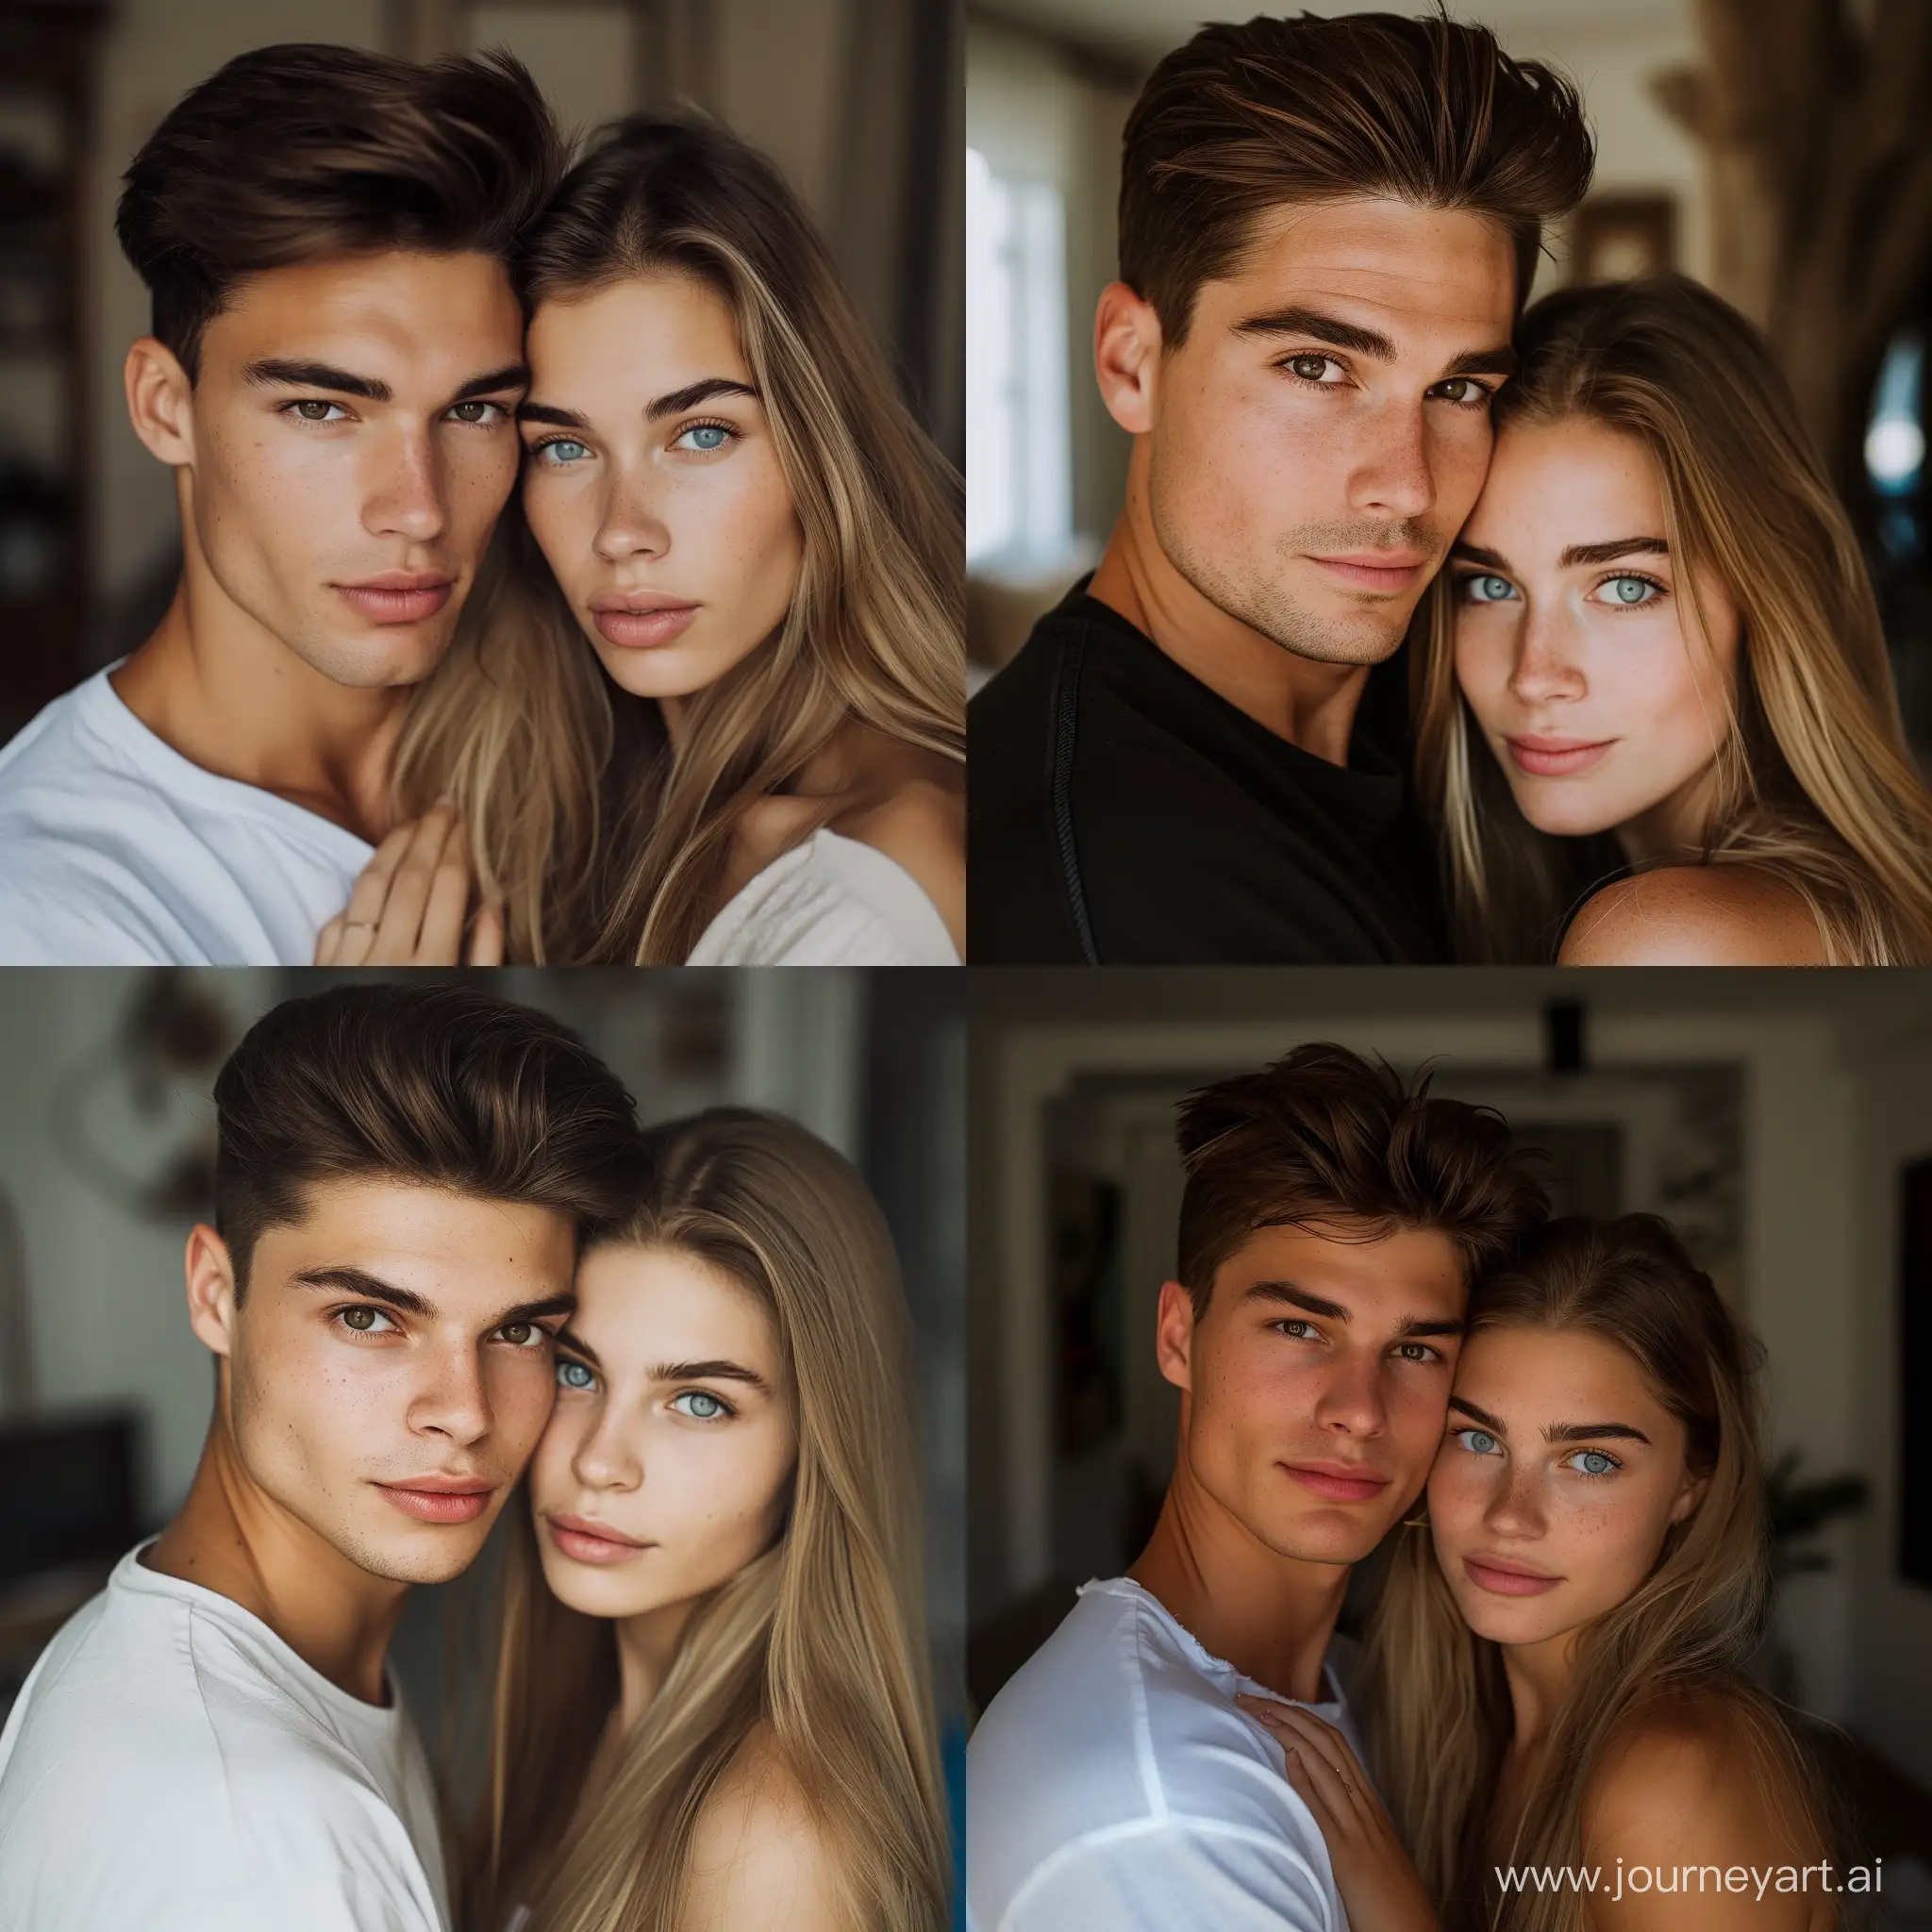 Captivating-Photoshoot-of-Confident-and-Charming-Couple-in-Home-Setting